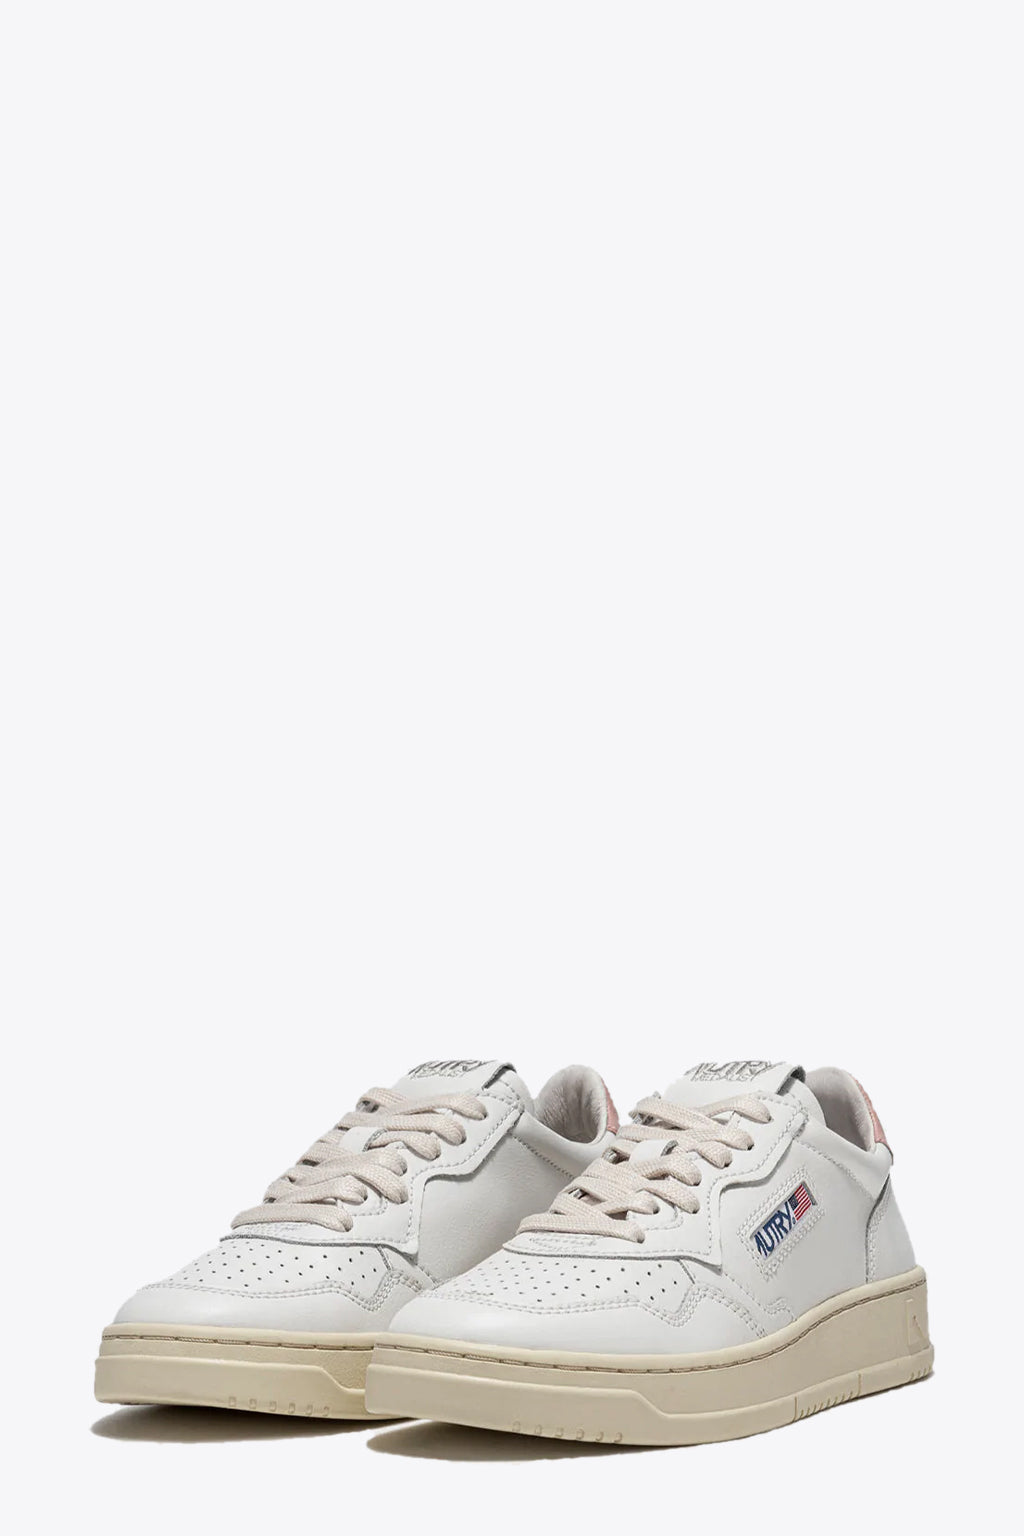 alt-image__White-leather-sneaker-with-powder-pink-back-tab---Medalist